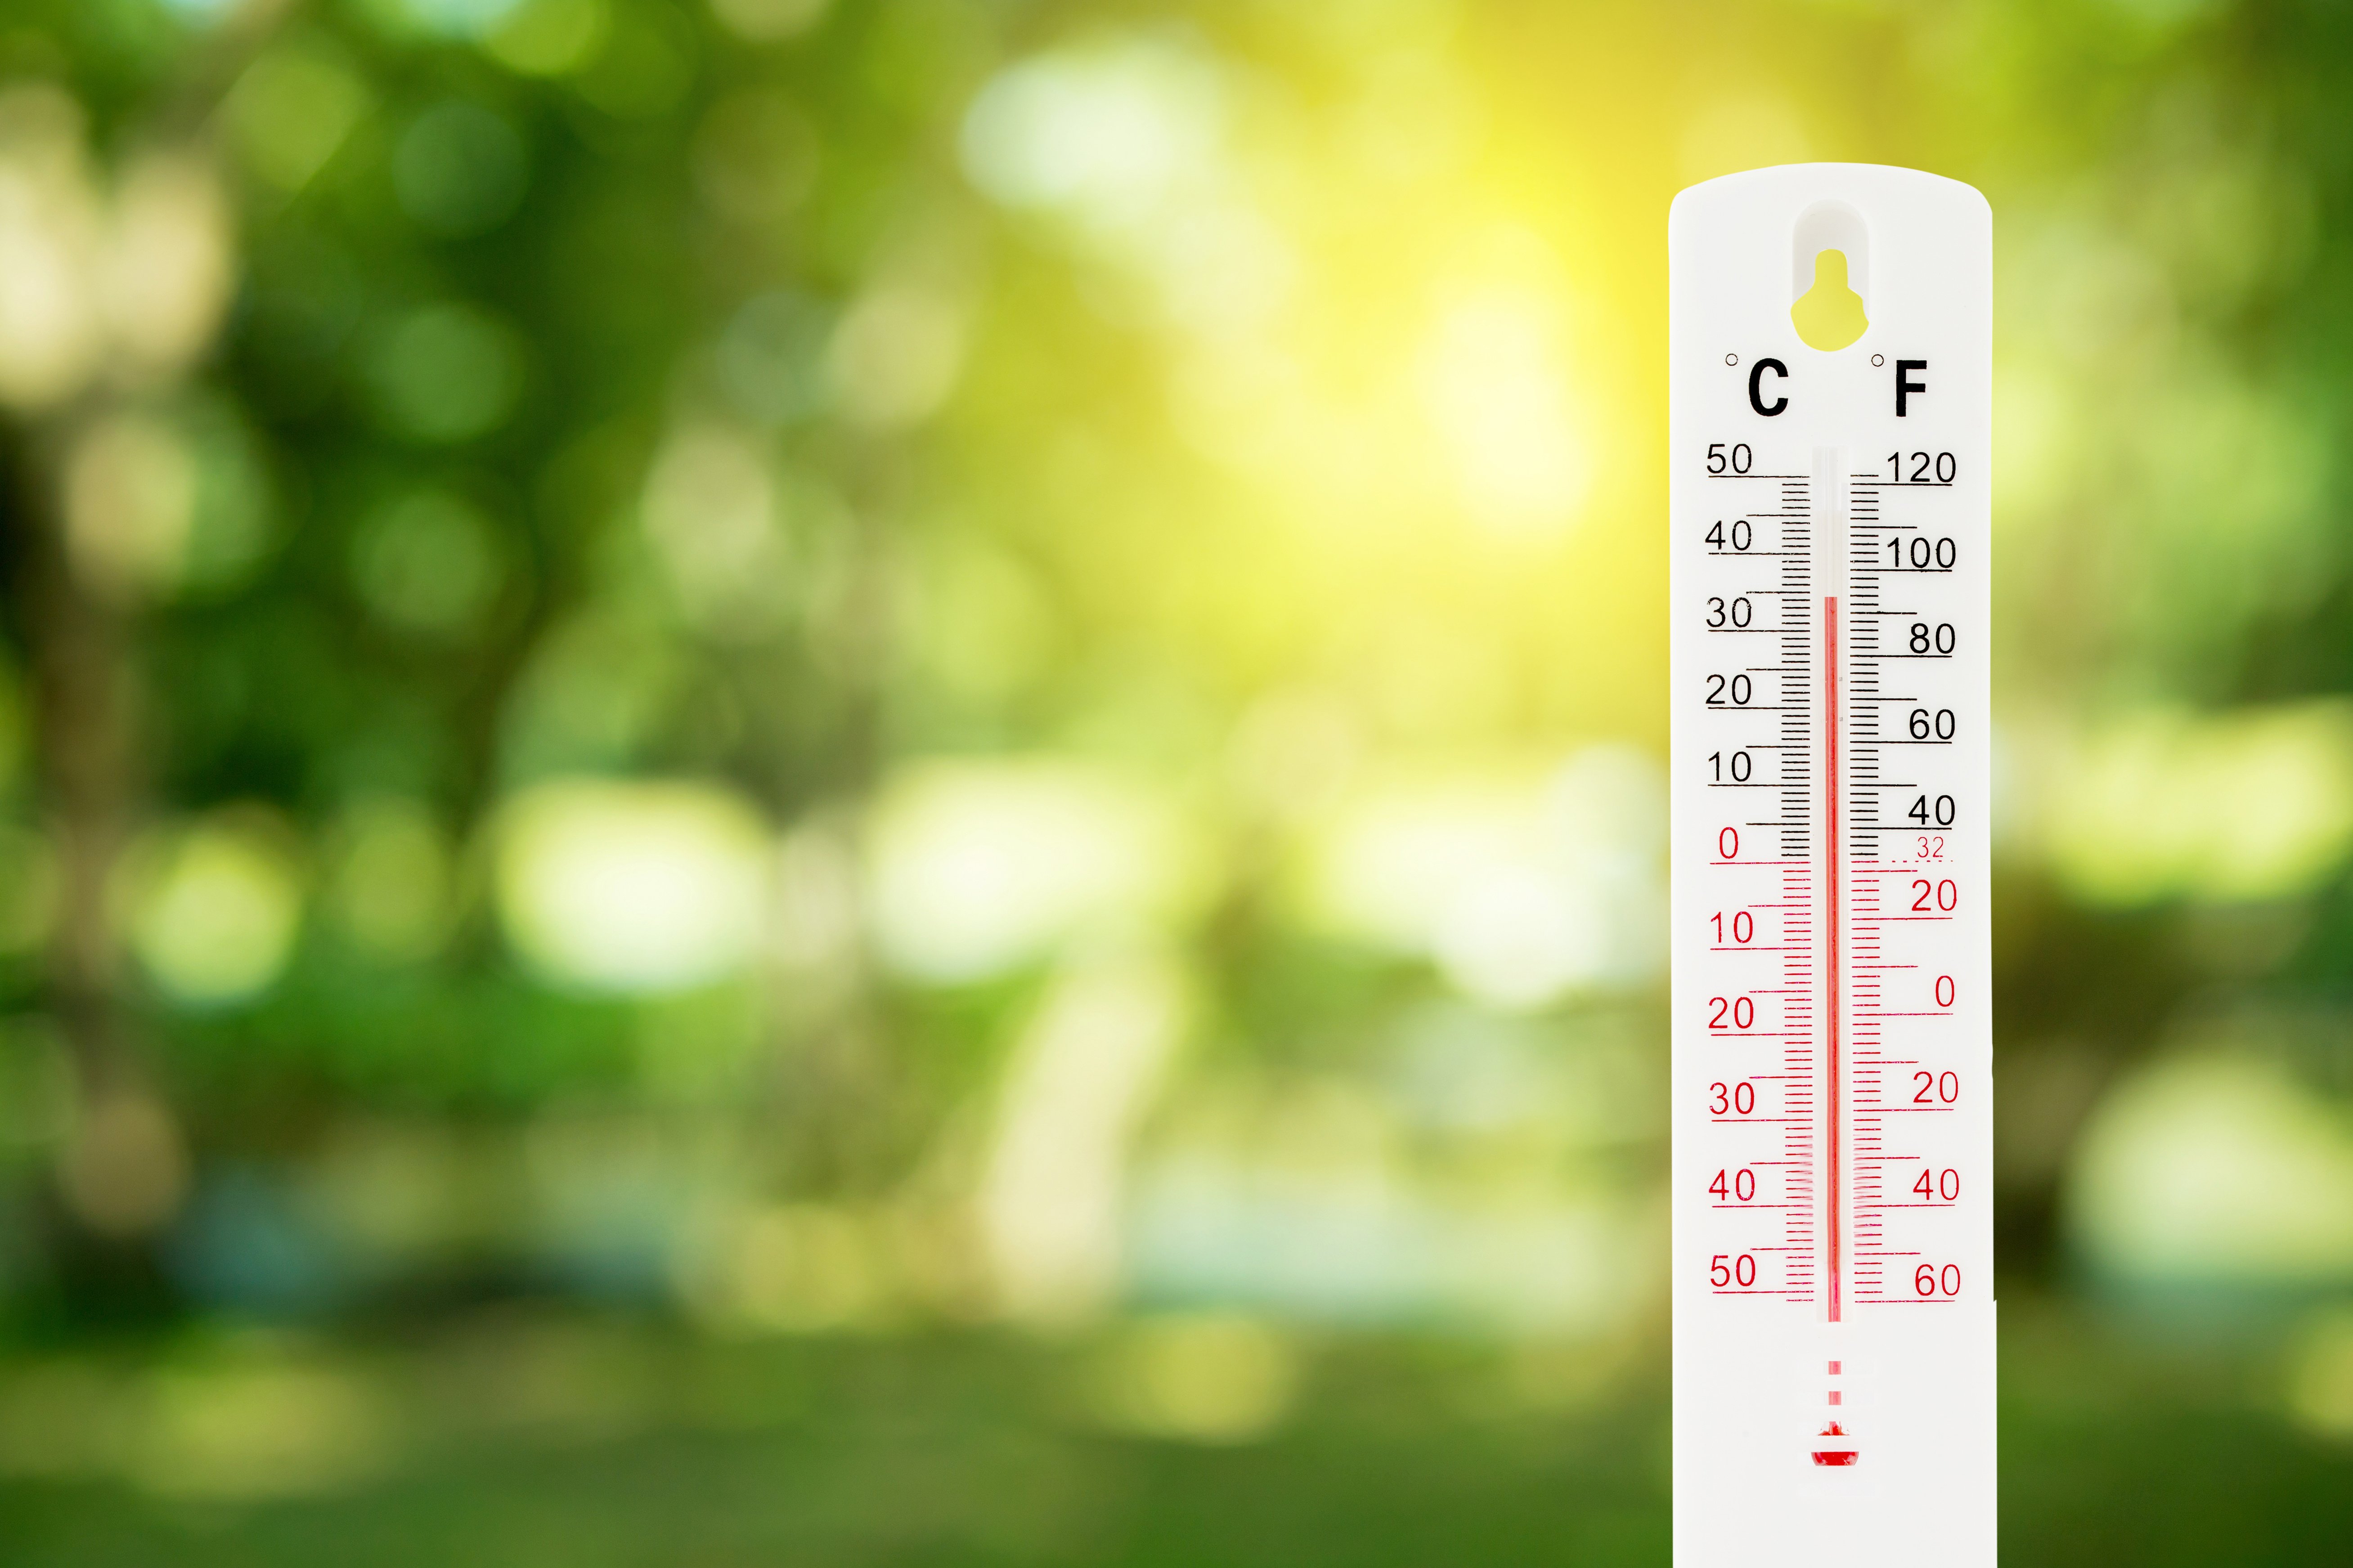 Thermometer measures the temperature in an outdoor green space